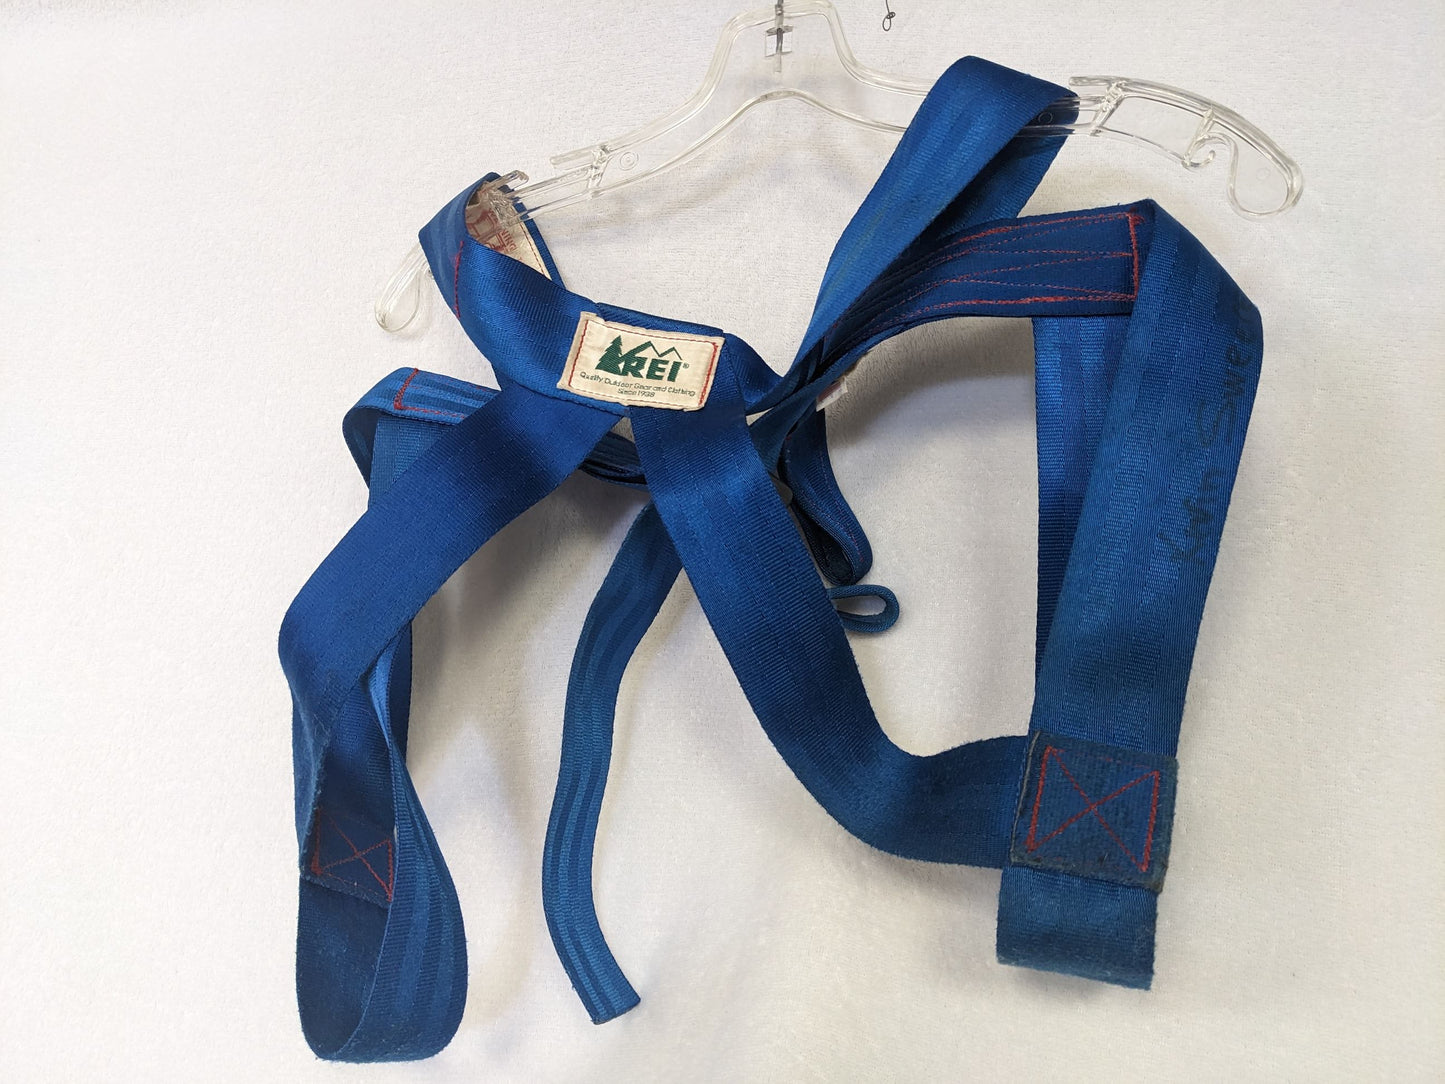 REI Climbing Harness Size Extra Large Color Blue Condition Used